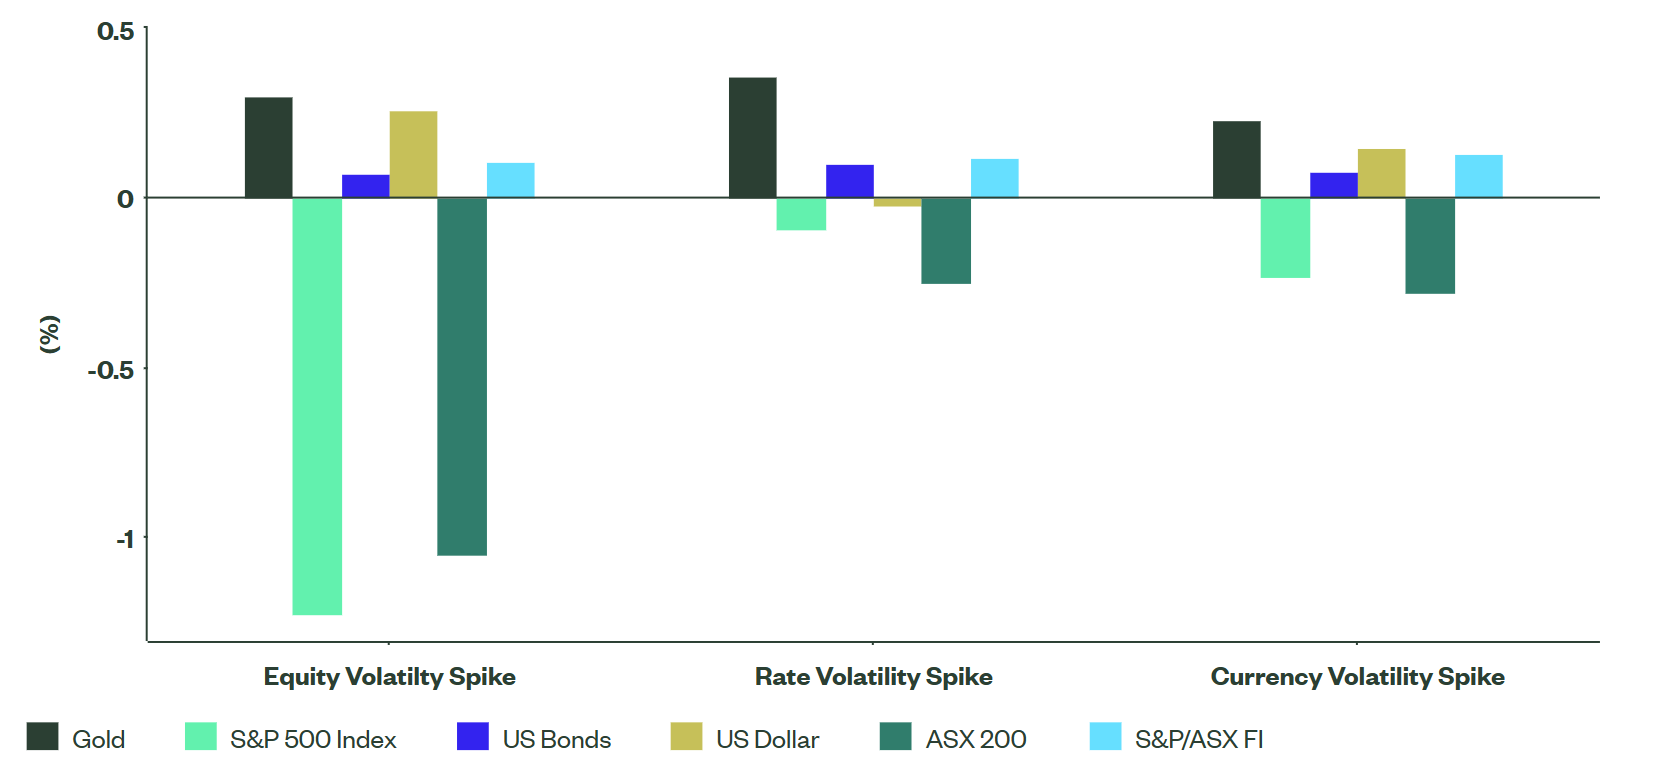 Source: Bloomberg Finance L.P., State Street Global Advisors. Data from January 1, 2005 to December 31, 2023. Equity volatility spike represented by one standard deviation rise in CBOE Volatility Index (VIX Index) on weekly basis. Rate volatility spike represented by one standard deviation rise in ICE BofA MOVE Index on weekly basis. Currency volatility spike represented by one standard deviation rise in JP Morgan Global FX Volatility Index on weekly basis. Gold: gold spot price in US Dollars, US Bonds: Bloomberg US Aggregate Index, US Dollar: US dollar spot index, S&P 500: S&P 500 price index. ASX 200: ASX 200 Index, S&P/ASX FI: S&P/ASX FI Index. Past performance is not a reliable indicator of future performance. Index returns reflect all items of income, gain and loss and the reinvestment of dividends. Performance of an index is not indicative of the performance of any product managed by State Street Global Advisors.